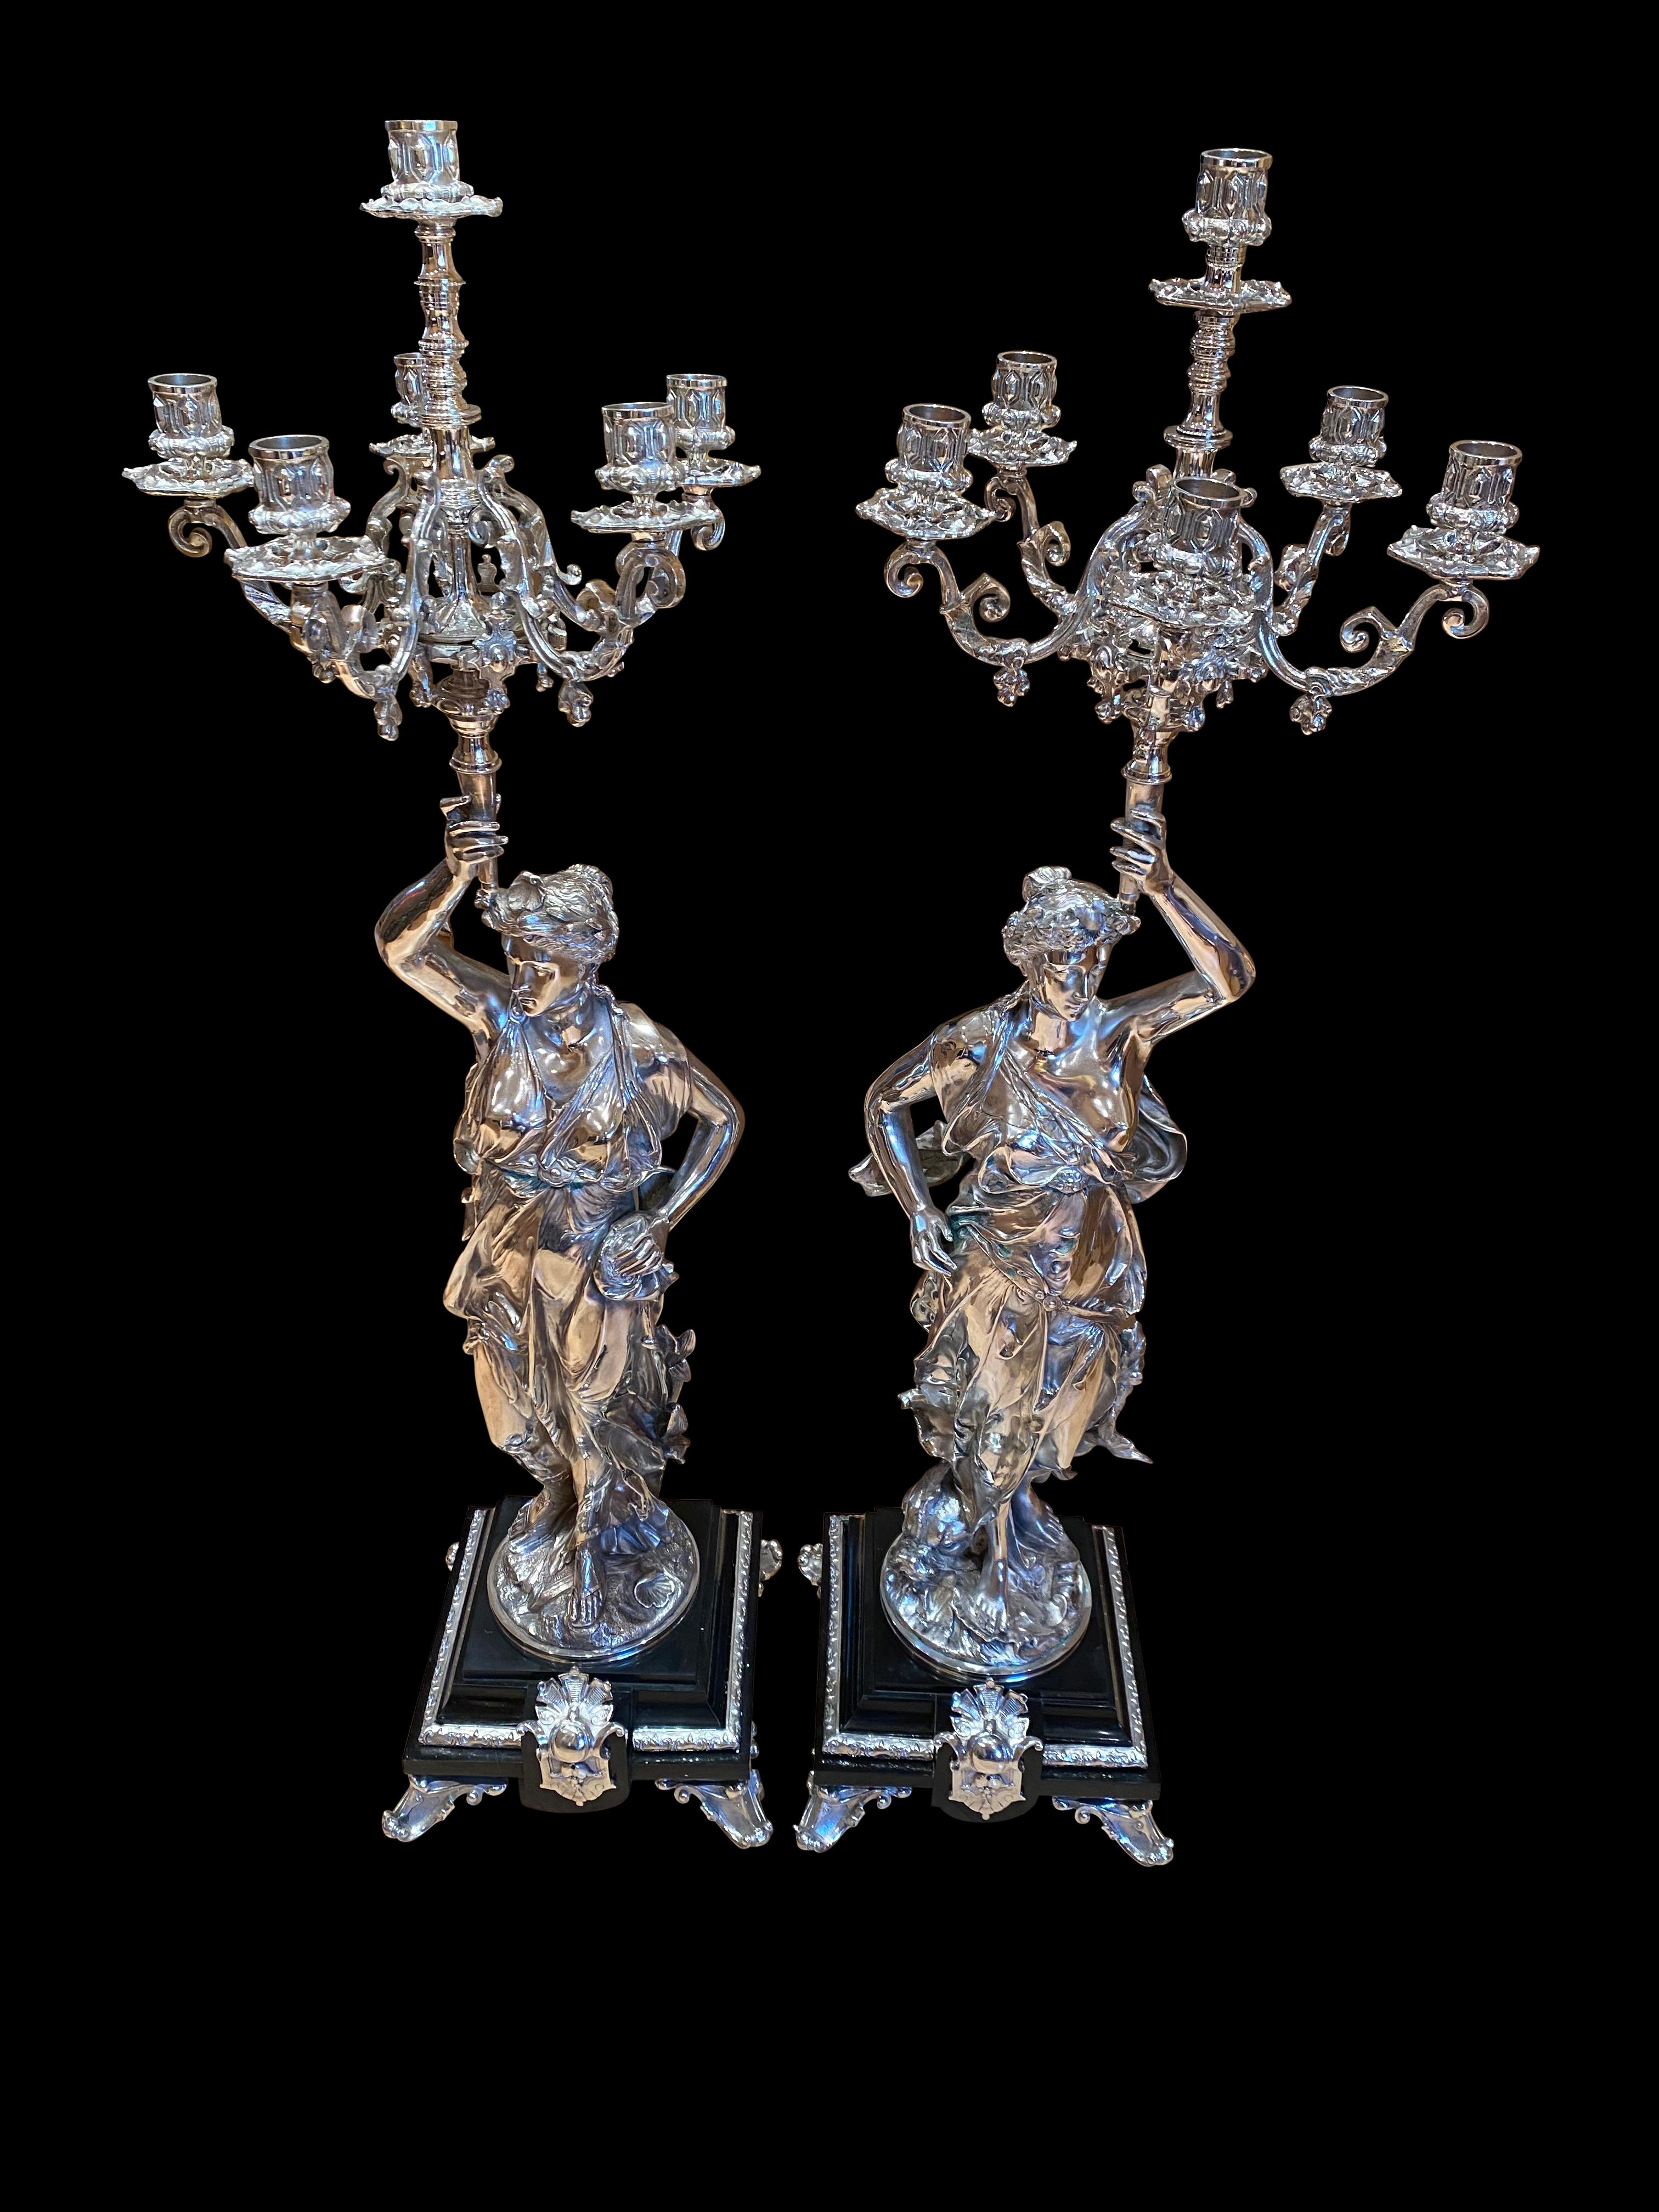 A stunning pair of Regency silver plate cherub candelabras, 20th century. Very eye-catching pair, perfect left and right. Great patina to the silver plate. Great collectors piece, and suitable for any home.